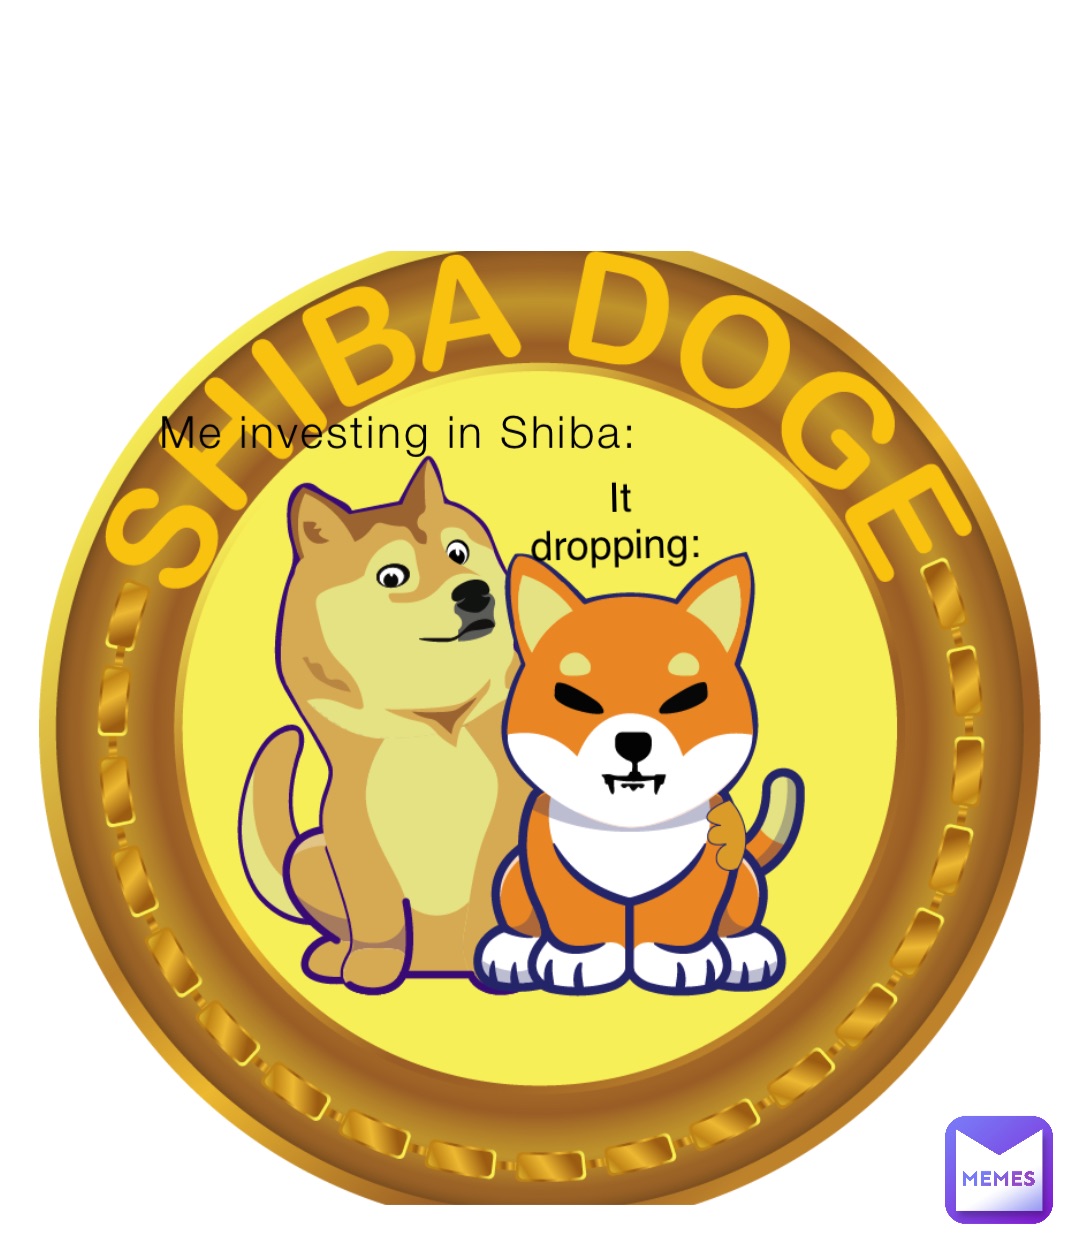 Me investing in Shiba: It dropping: